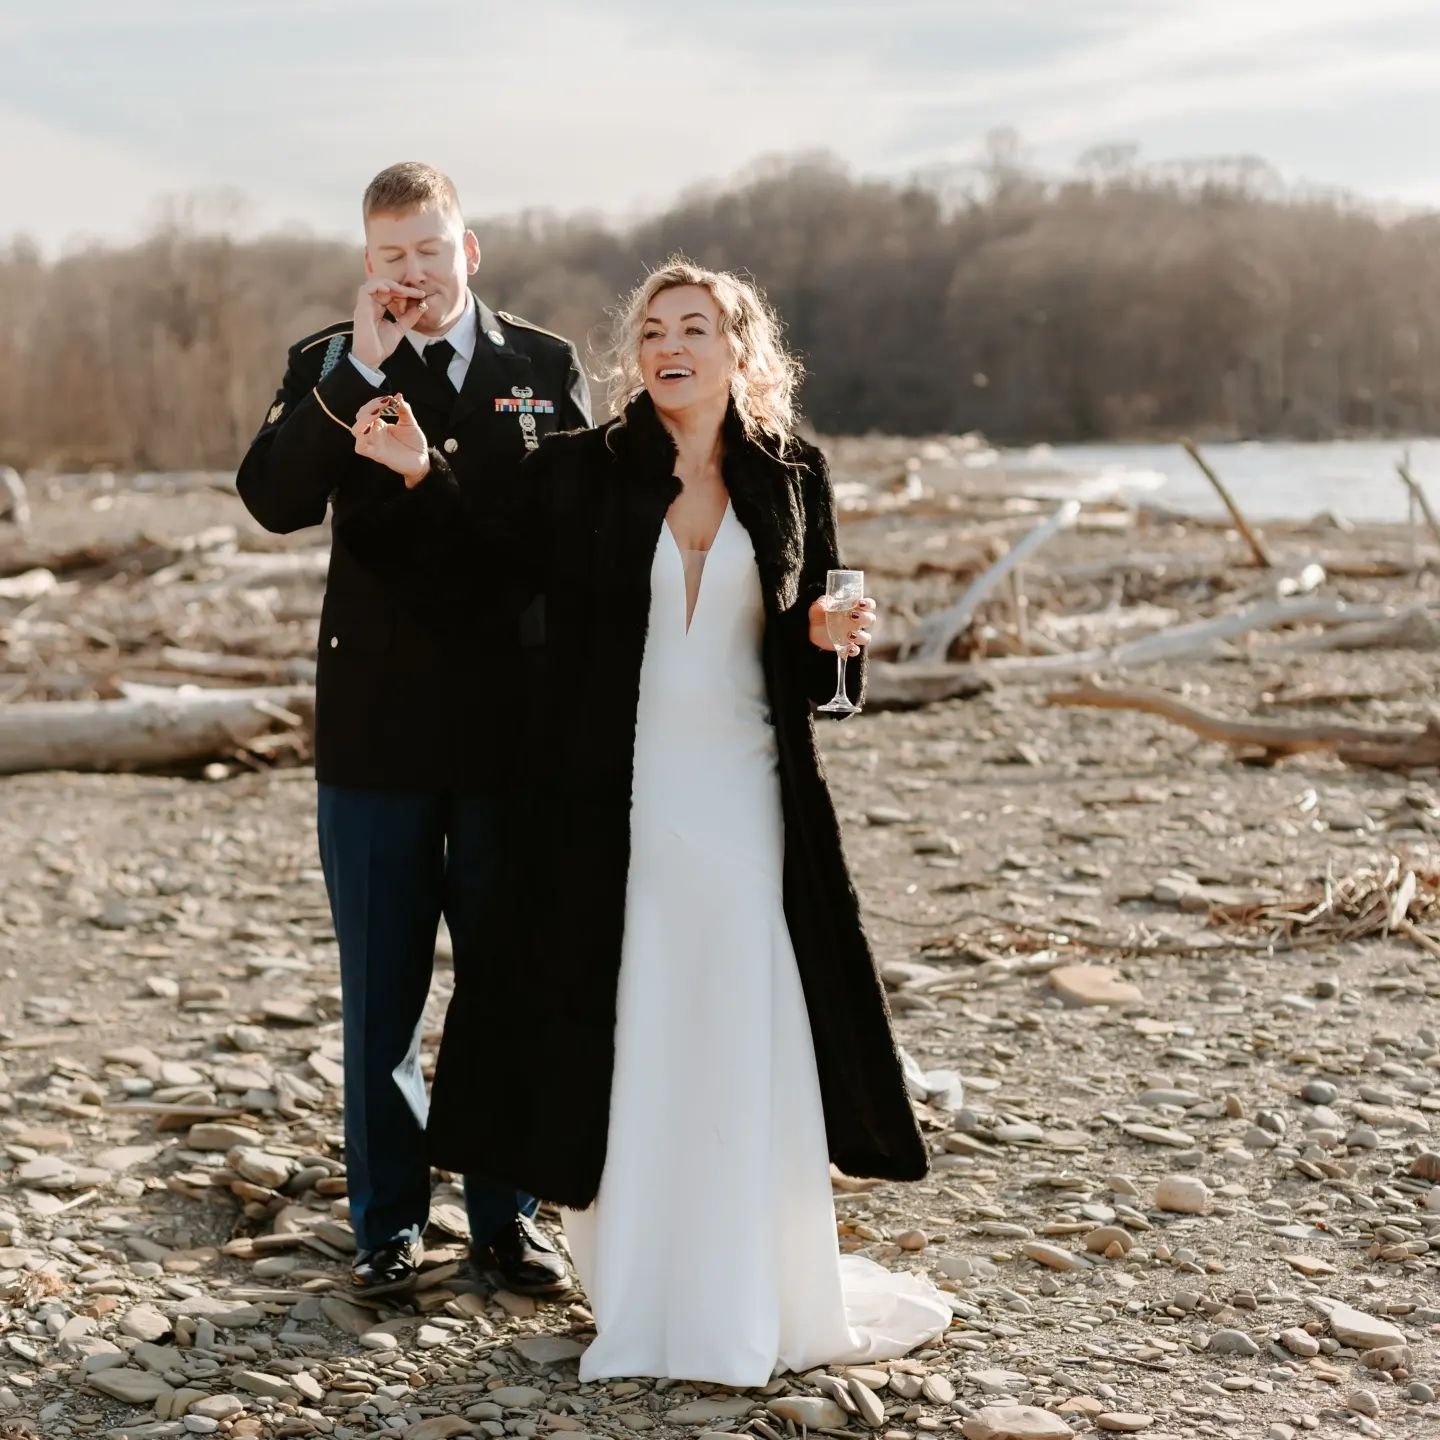 Cliffside intimate ceremony ✔️⁠
Dogs in wedding attire ✔️⁠
Cigars at sunset ✔️⁠
Dinner at your childhood lake cottage ✔️⁠
Marrying your favorite person ✔️⁠
⁠
A few days late, but we couldn't miss wishing Molly+Dylan the happiest first wedding anniver